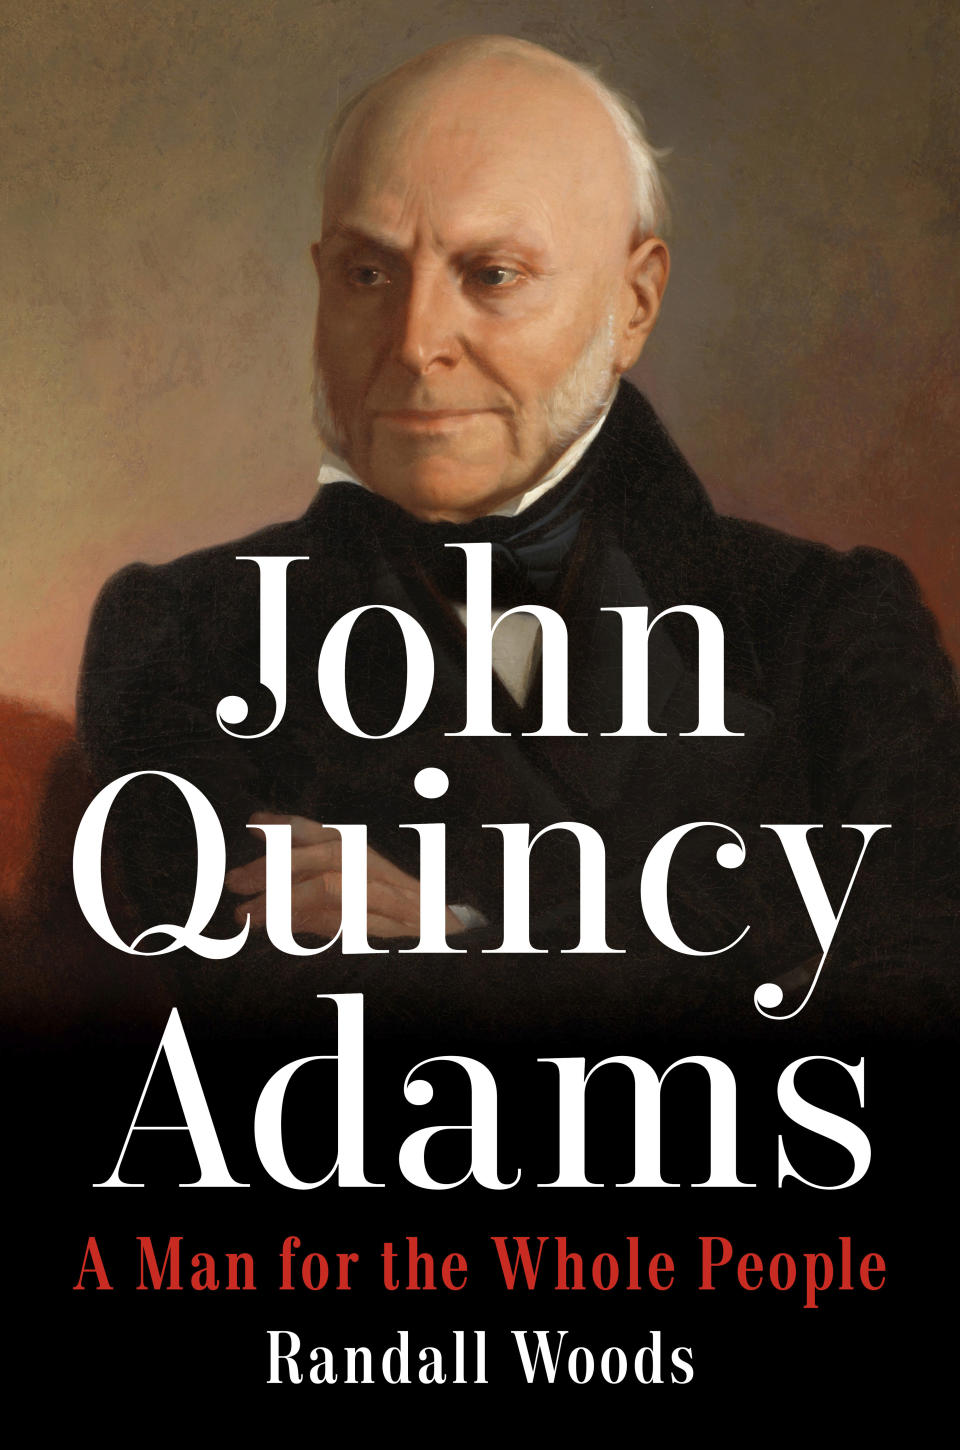 This book cover image released by Dutton shows "John Quincy Adams: A Man for the Whole People" by Randall Woods. (Dutton via AP)